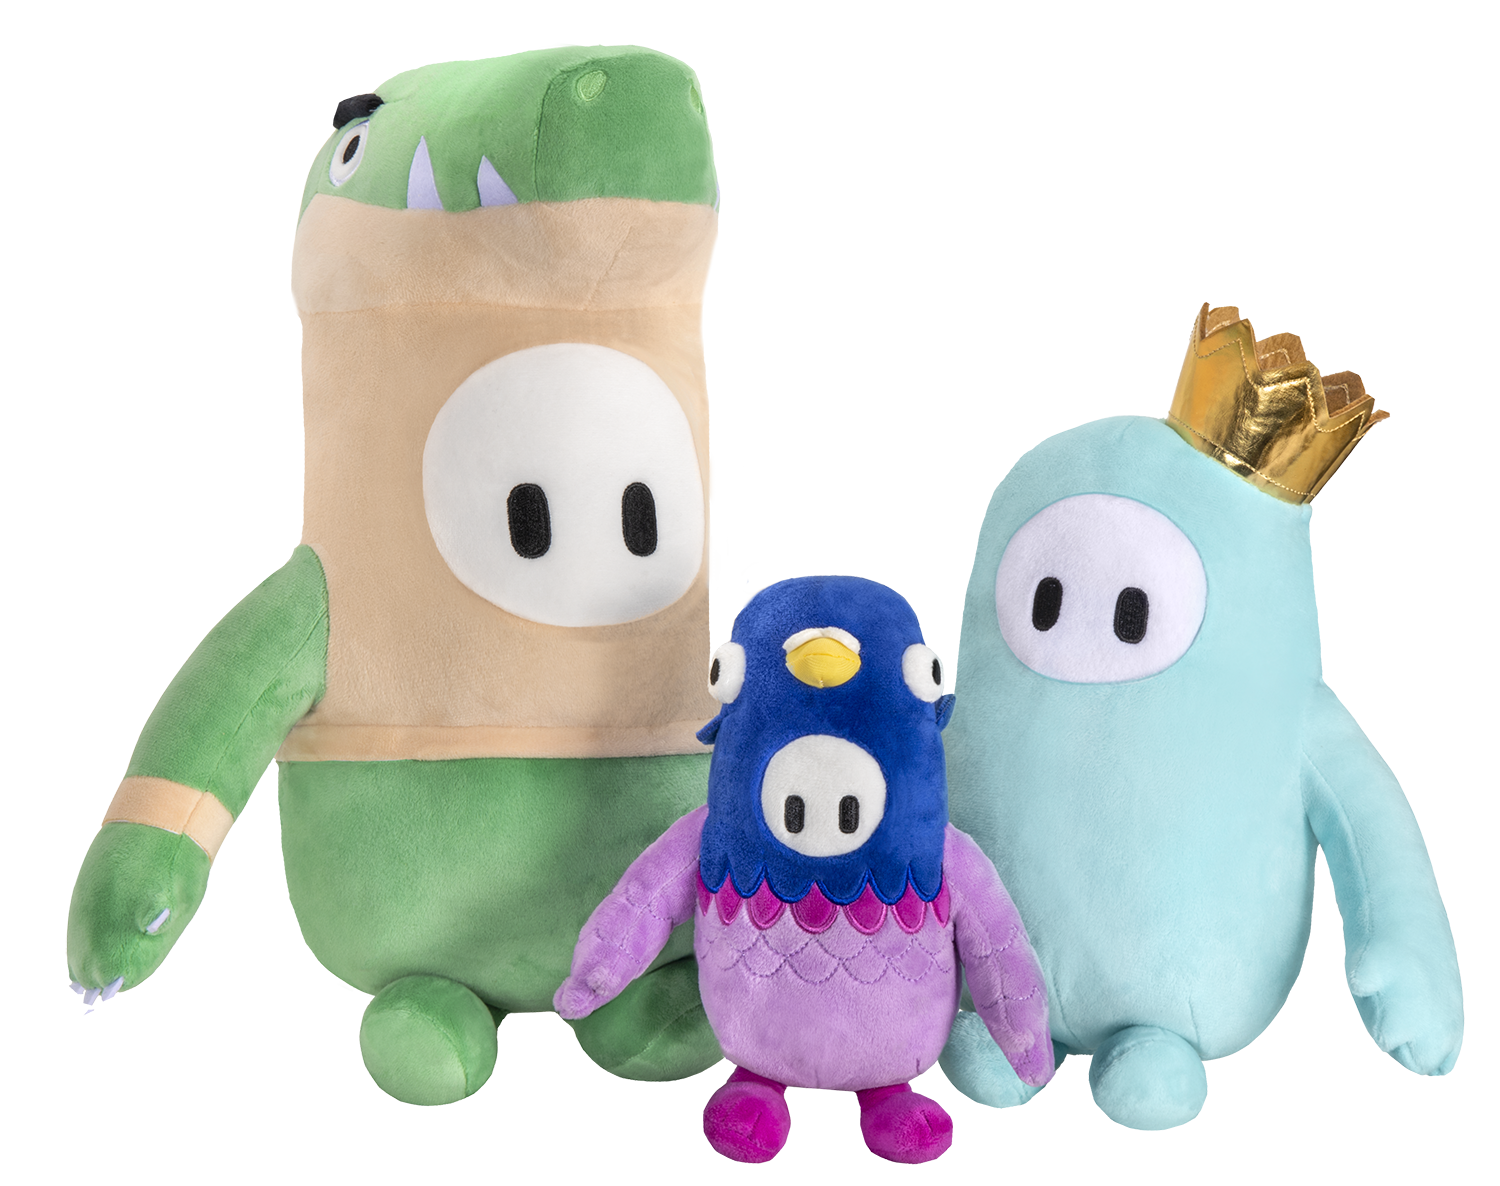 FALL GUYS Moose Toys Original Blue Bean Skin Official Collectable 12 Super Soft Cuddly Deluxe Plush Toys from The Ultimate Knockout Video Game 3 Characters to Collect Series 1,62550 